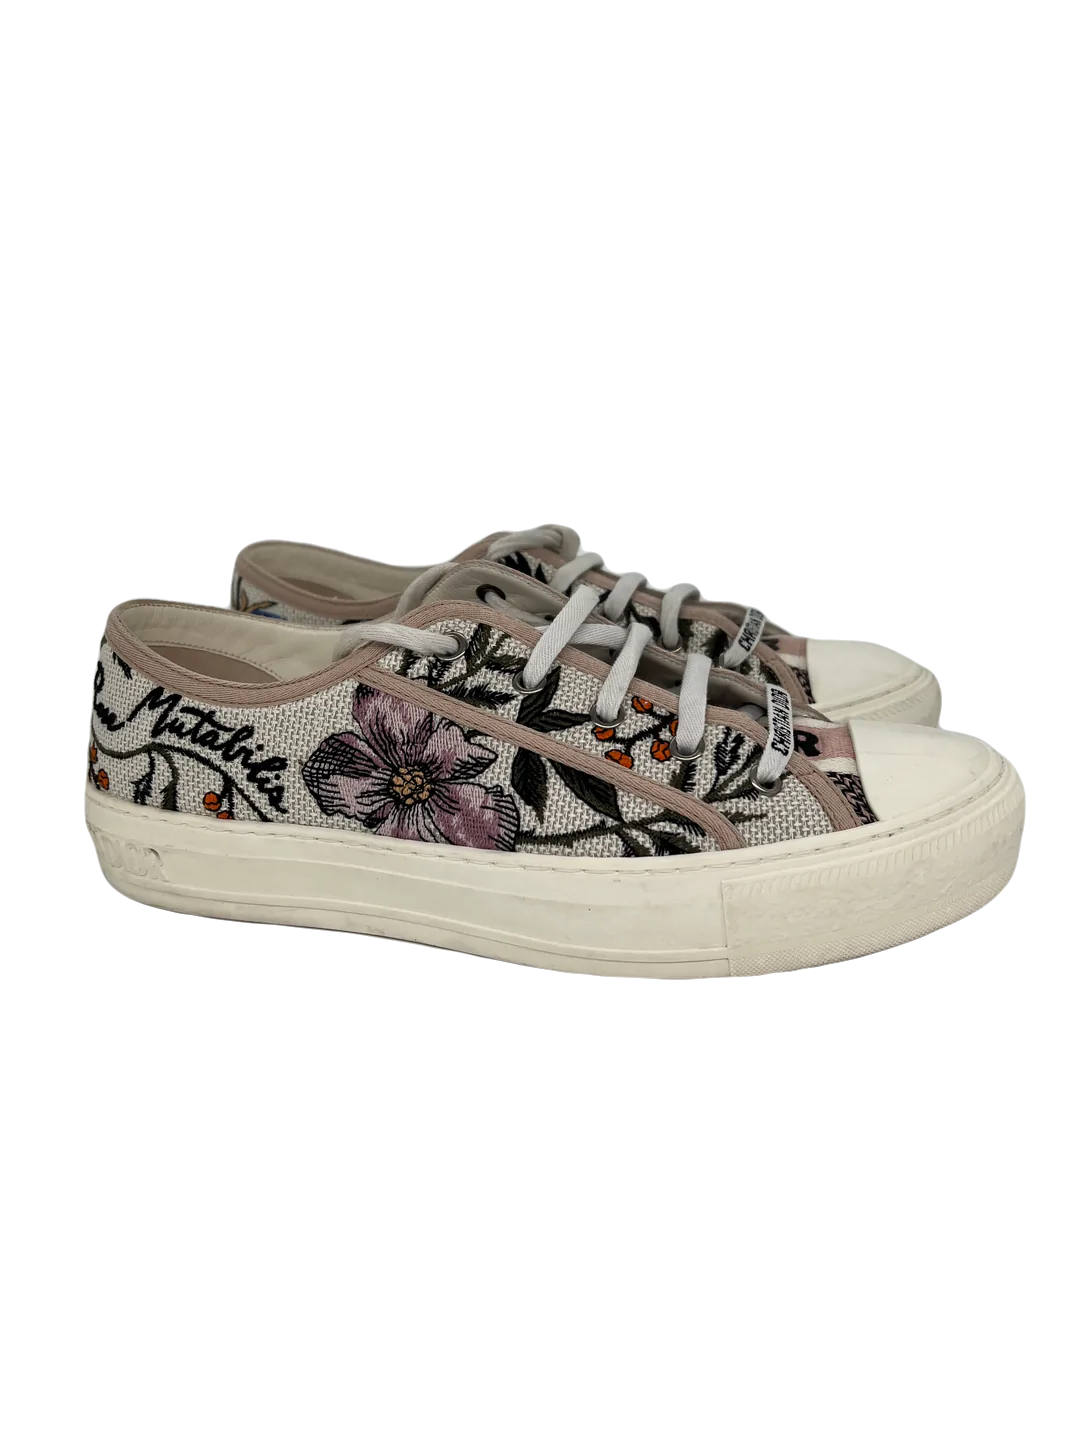 Dior Floral Sneaker - Size 41 - SOLD